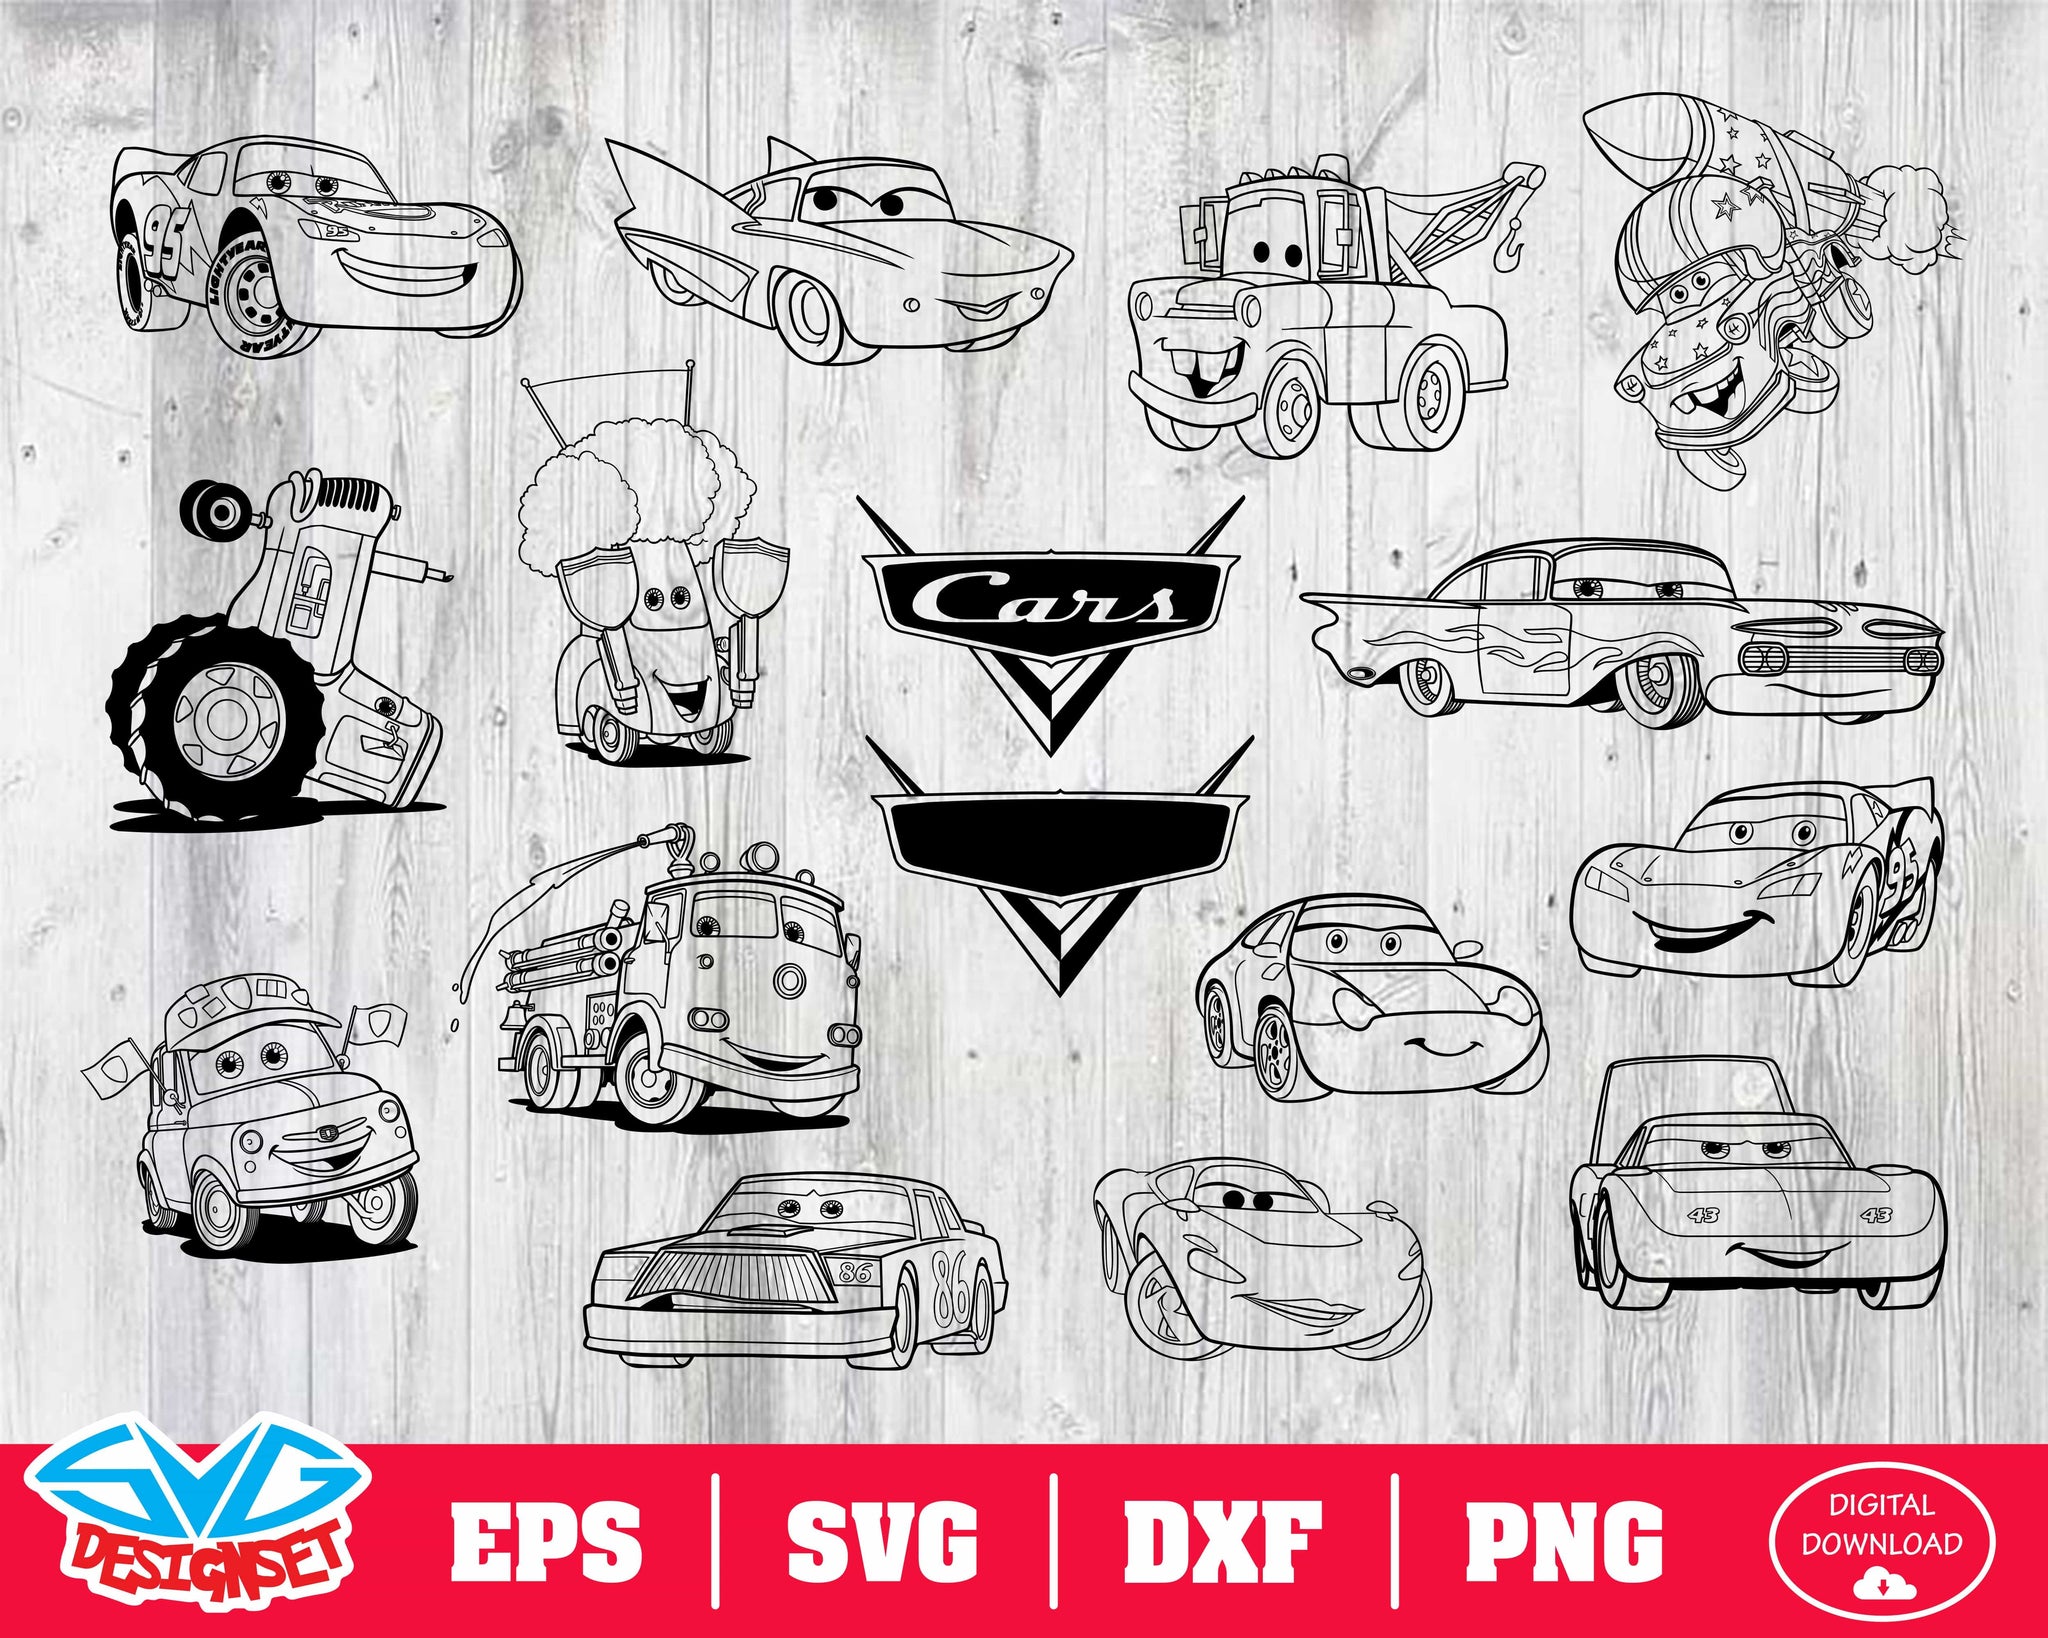 Disney cars Svg Dxf, Eps, Png, Clipart, Silhouette and Cutfiles